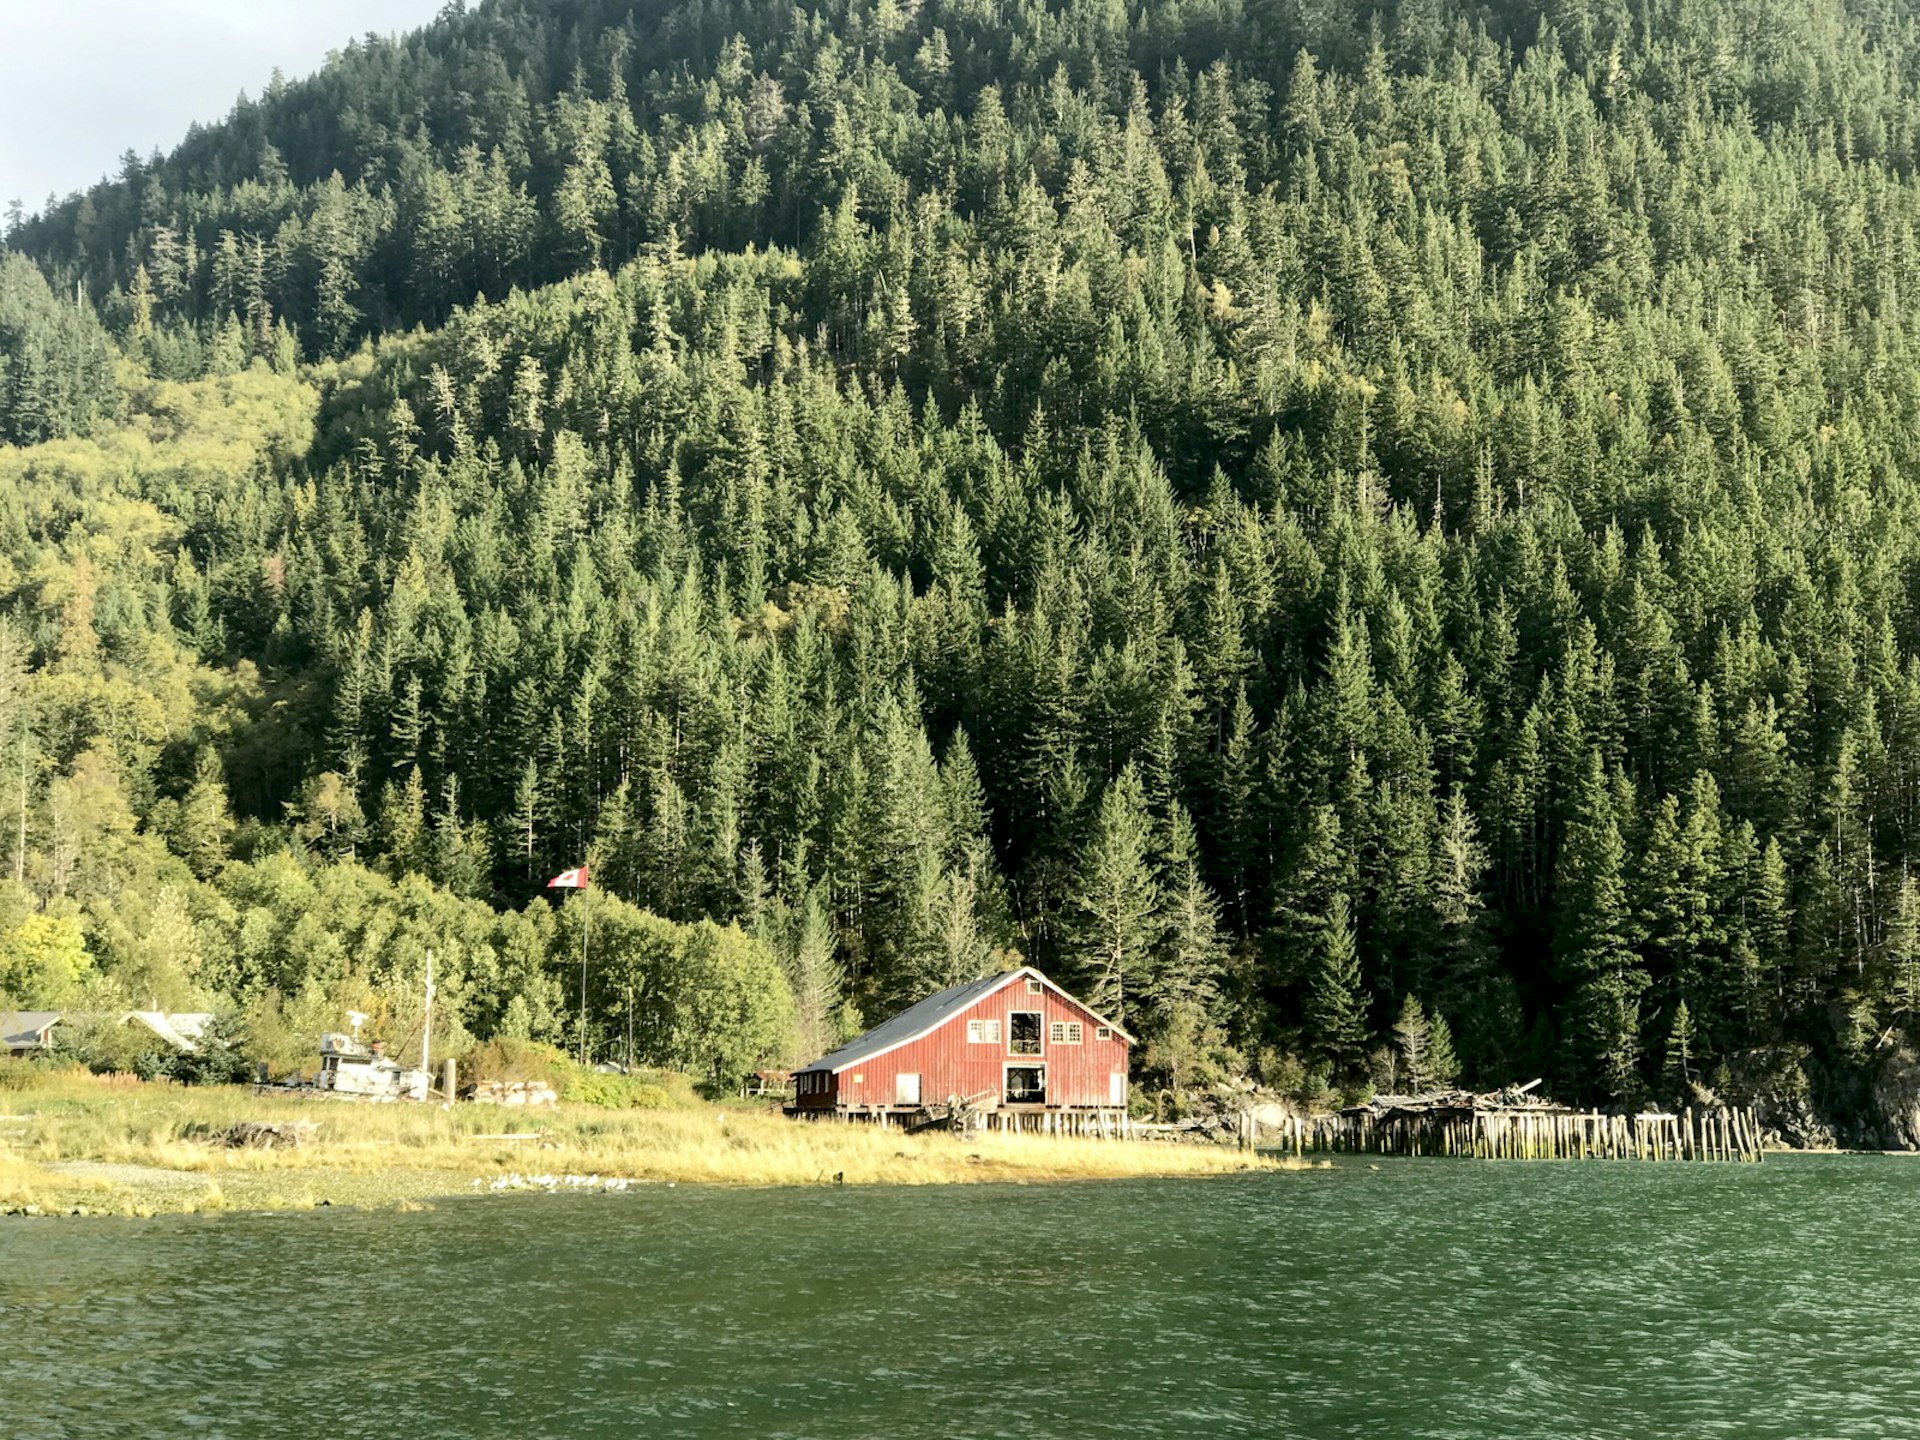 A dilapidated red-painted building and some old pilings stick out from a rugged coastline on the Inside Passage in British Columbia